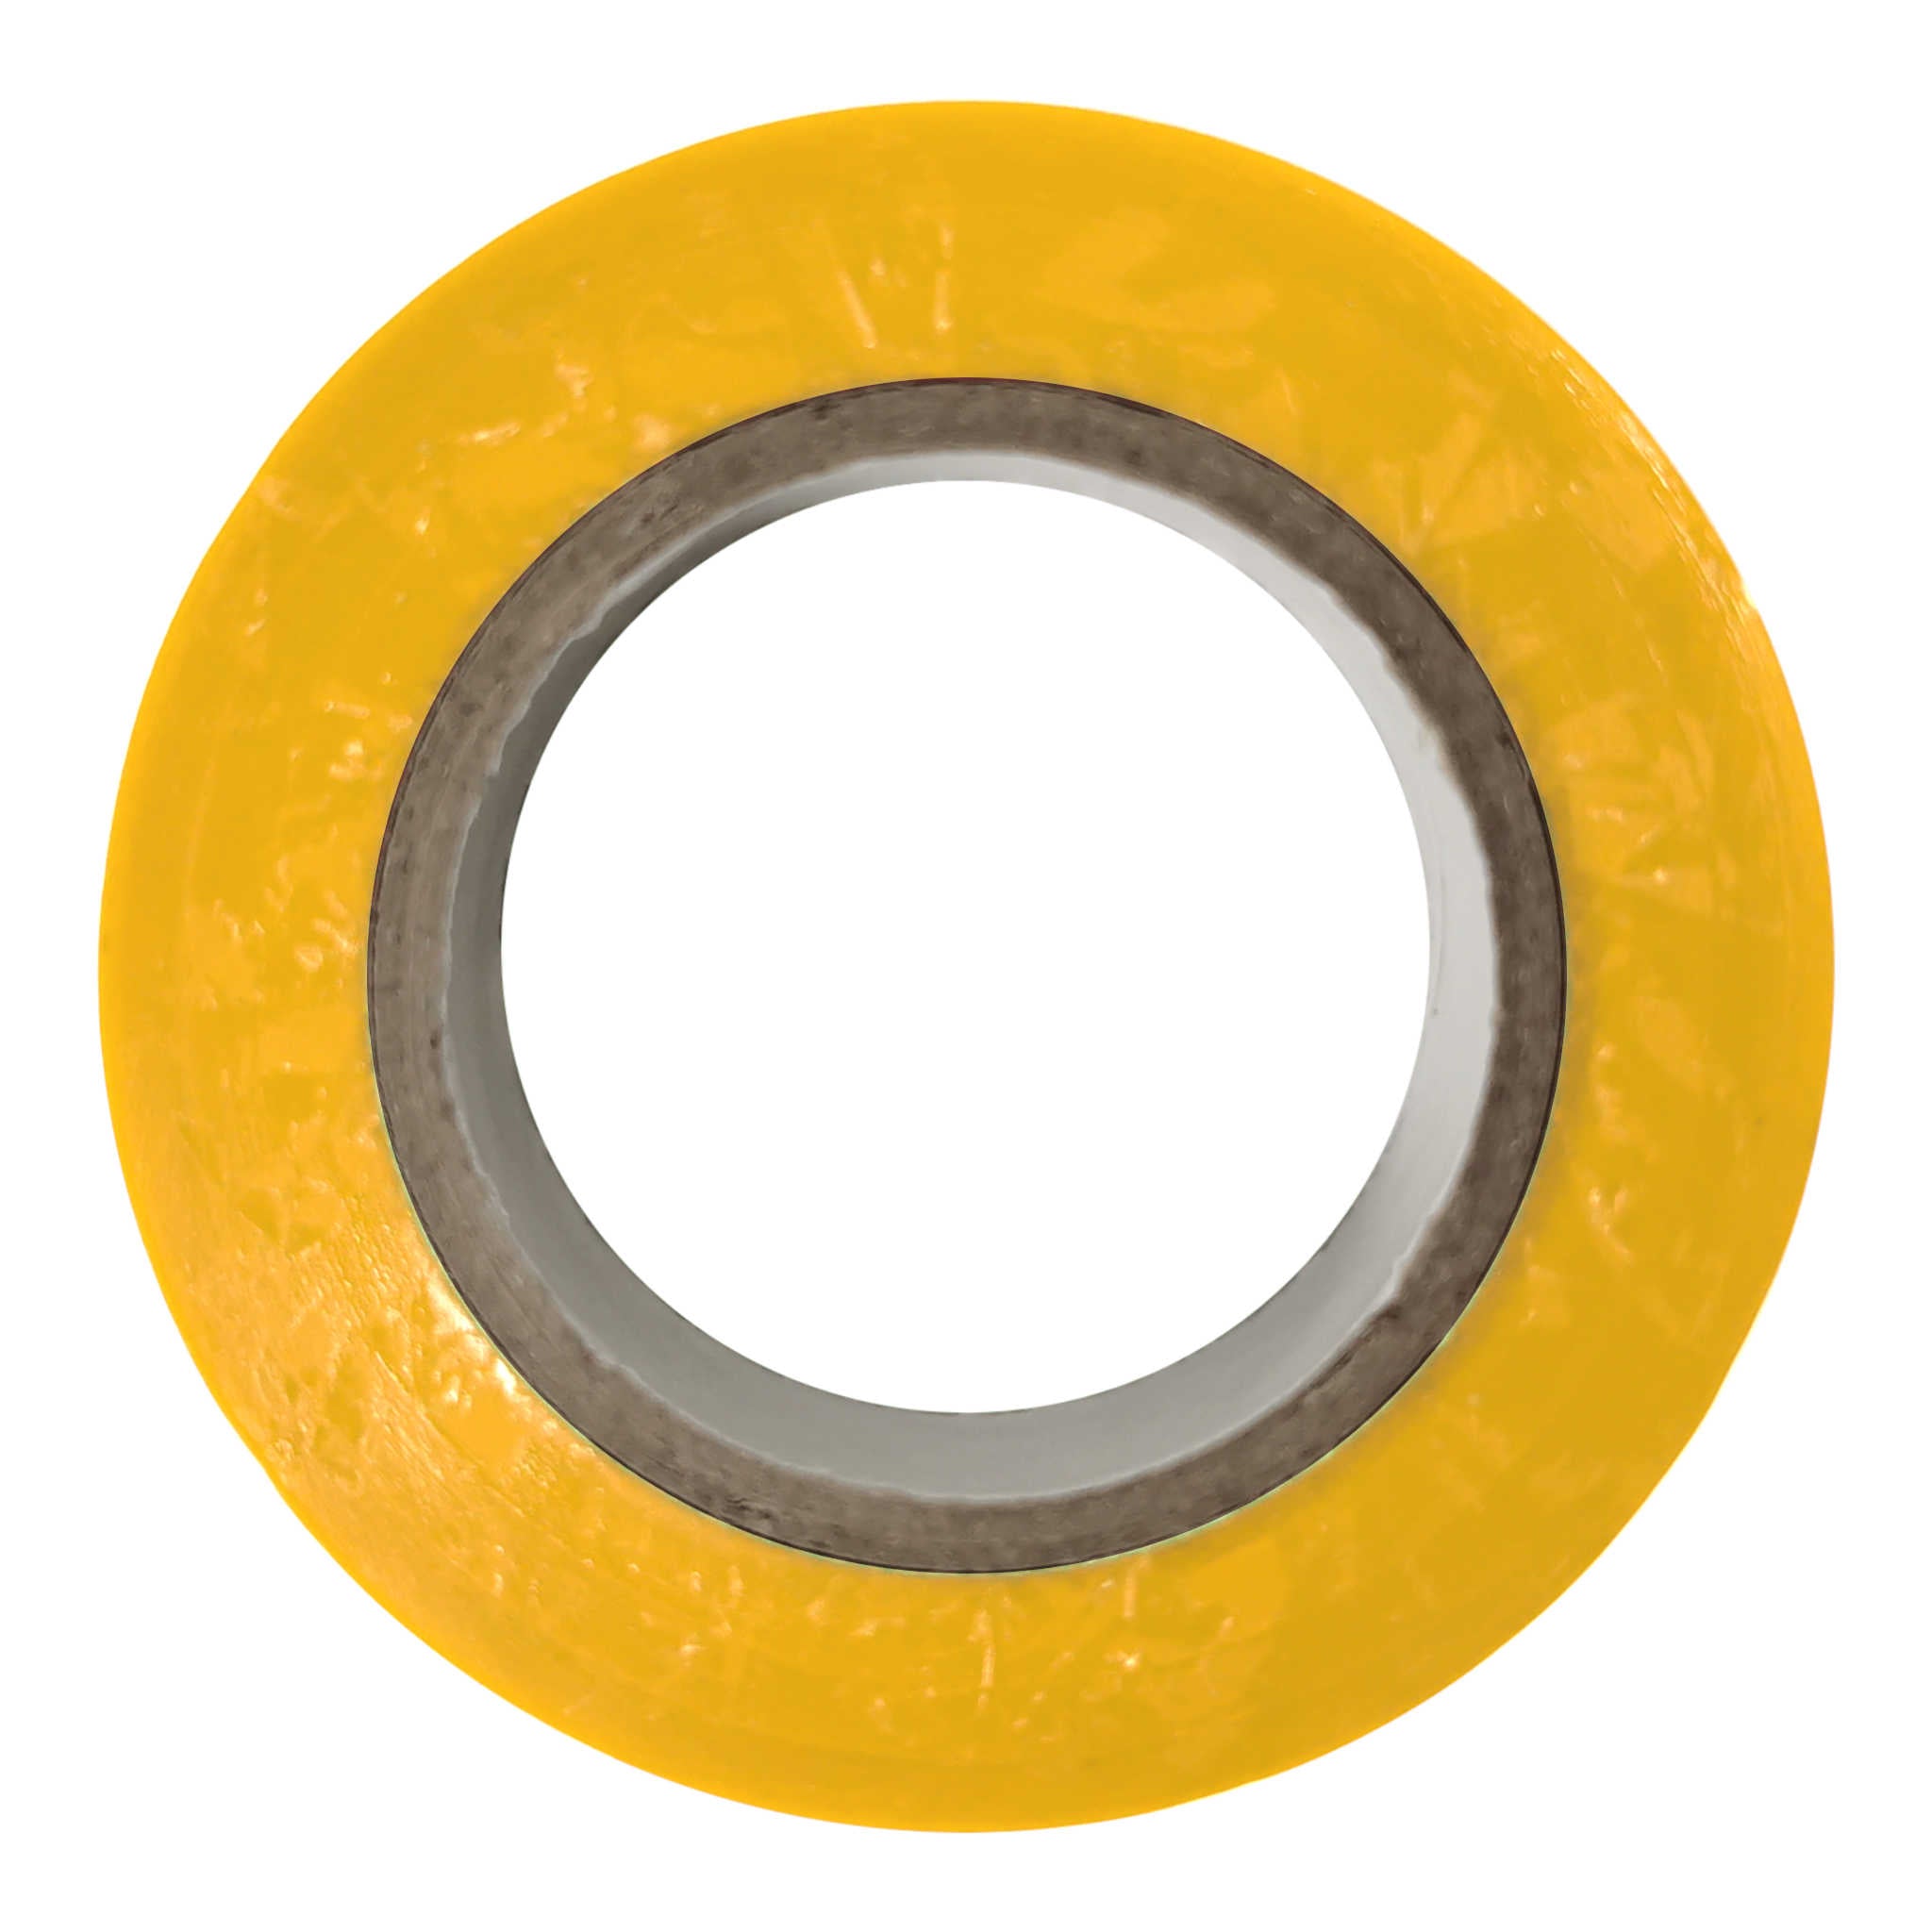 PVC Electrical Insulation Tape | 0.18 x 19mm x 18m | Yellow